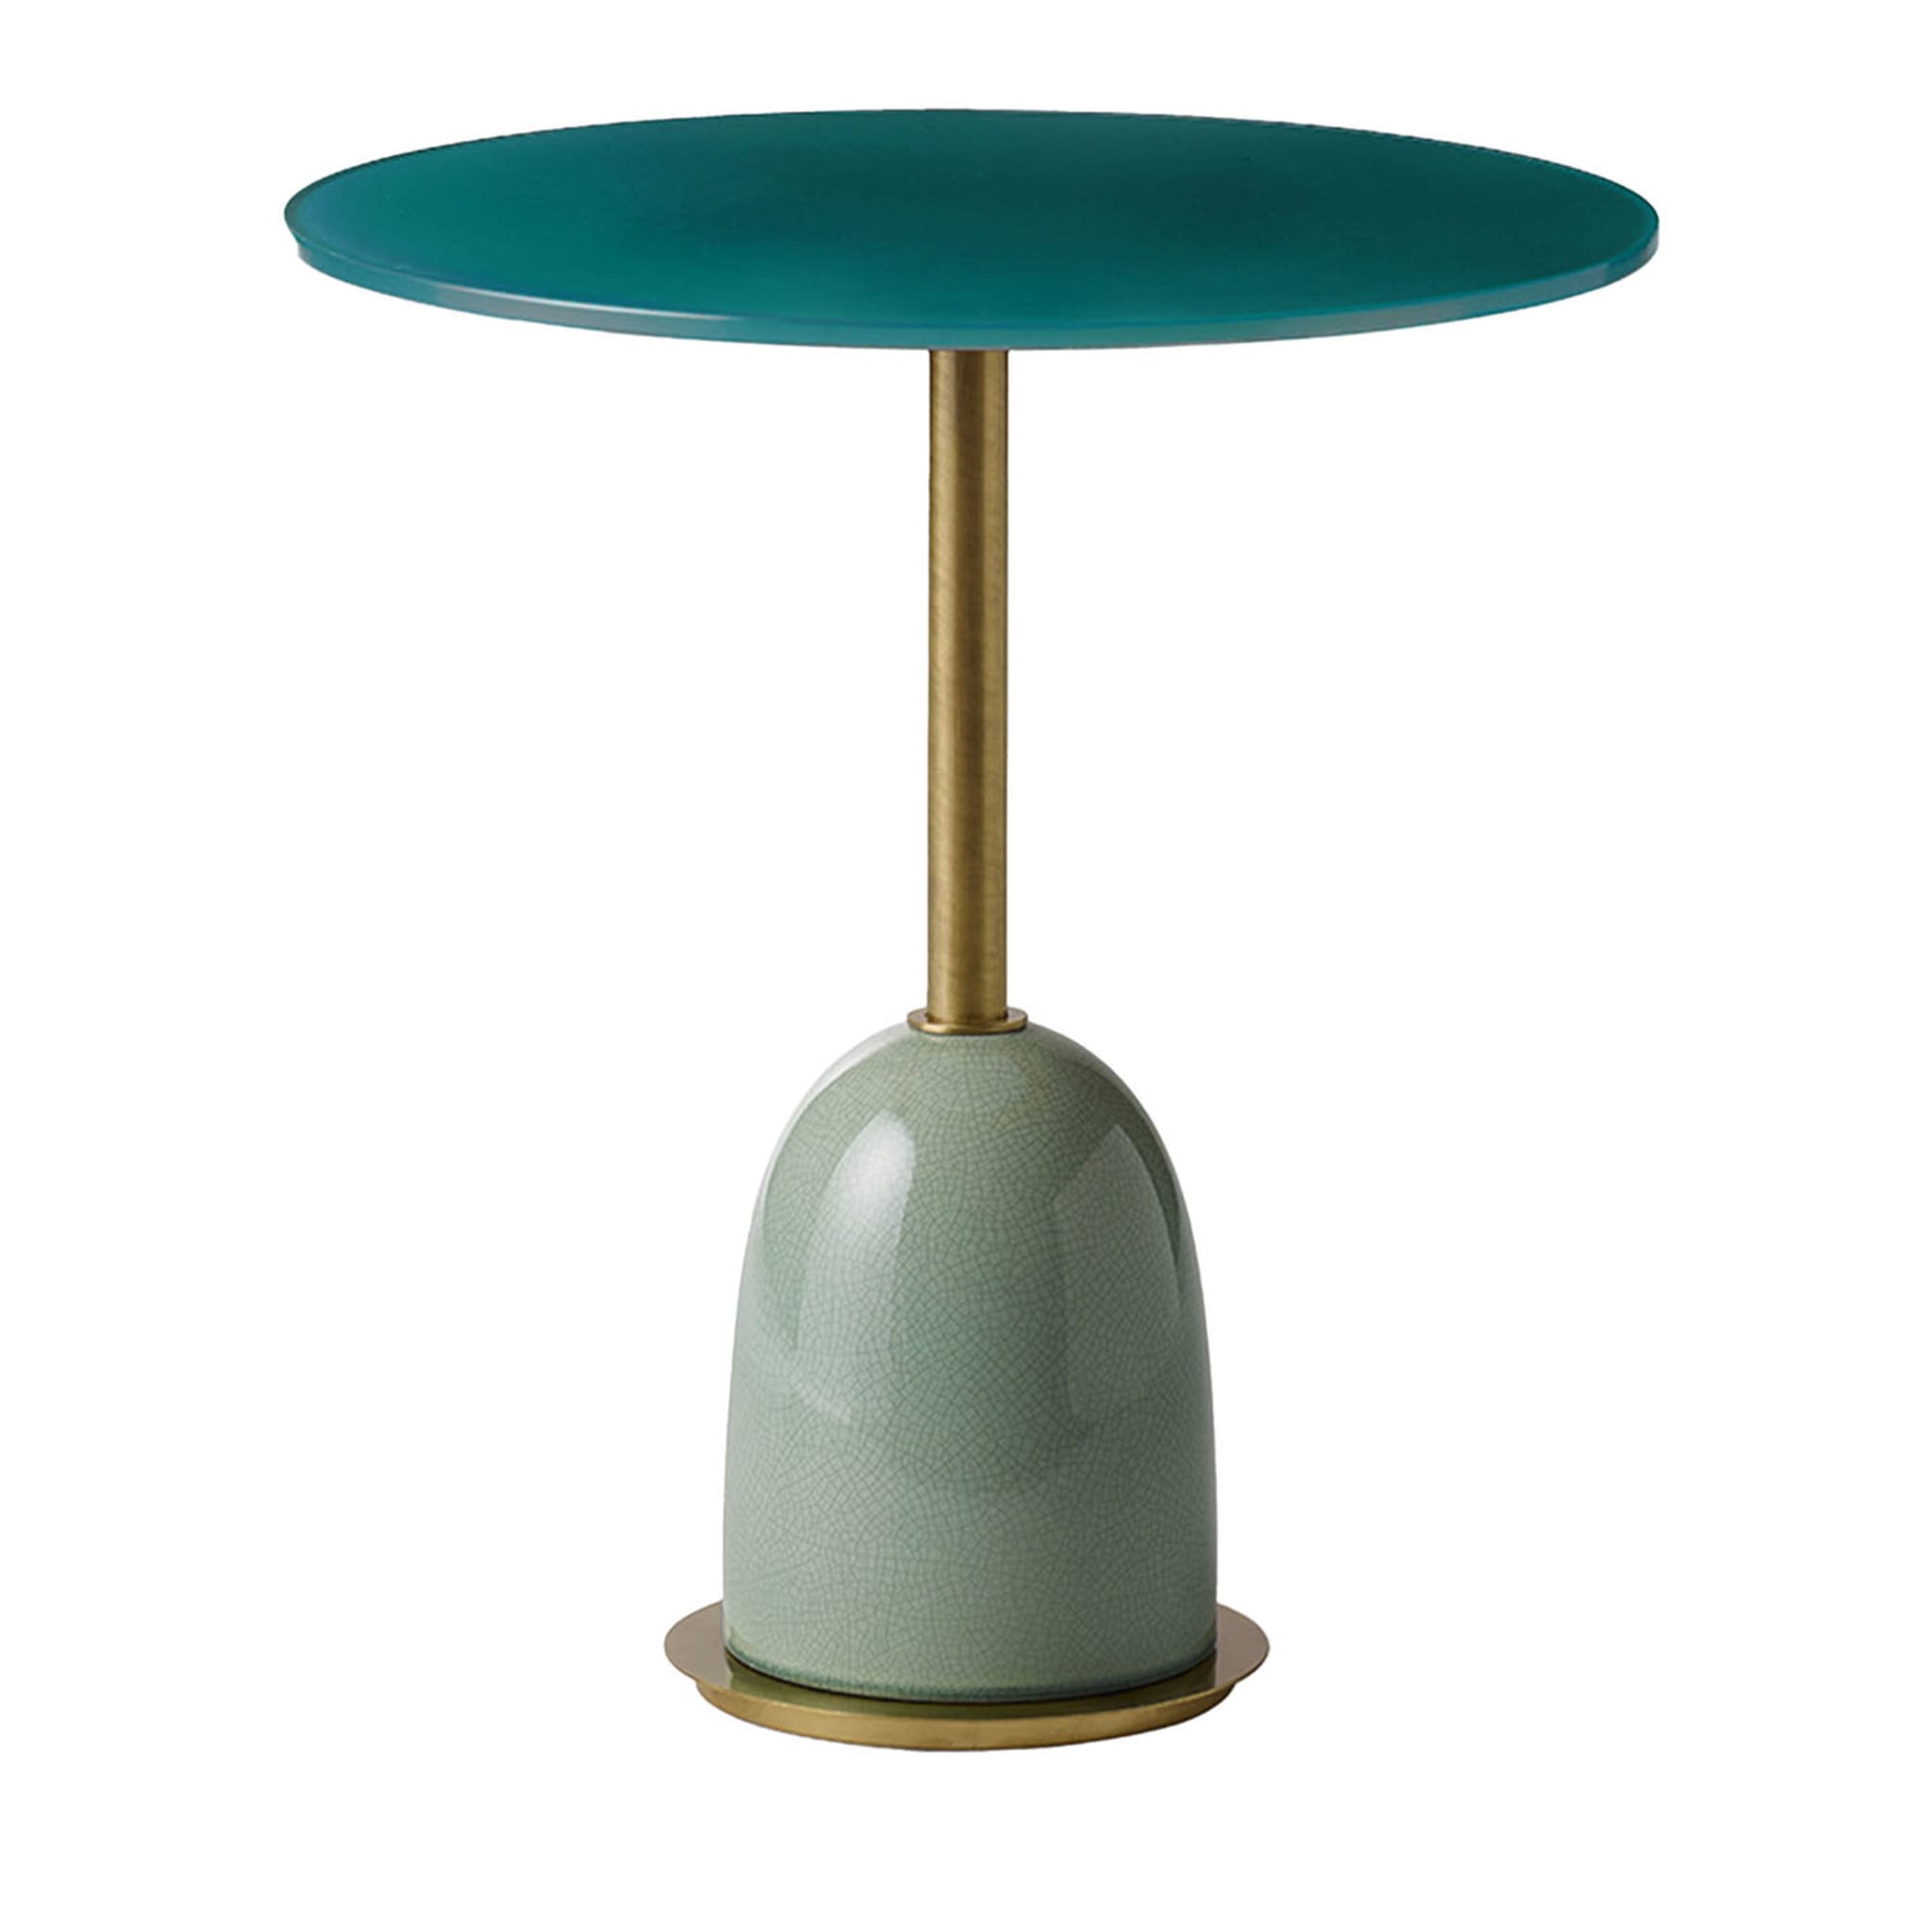 Pins Medium Turquoise Side Table - Main view